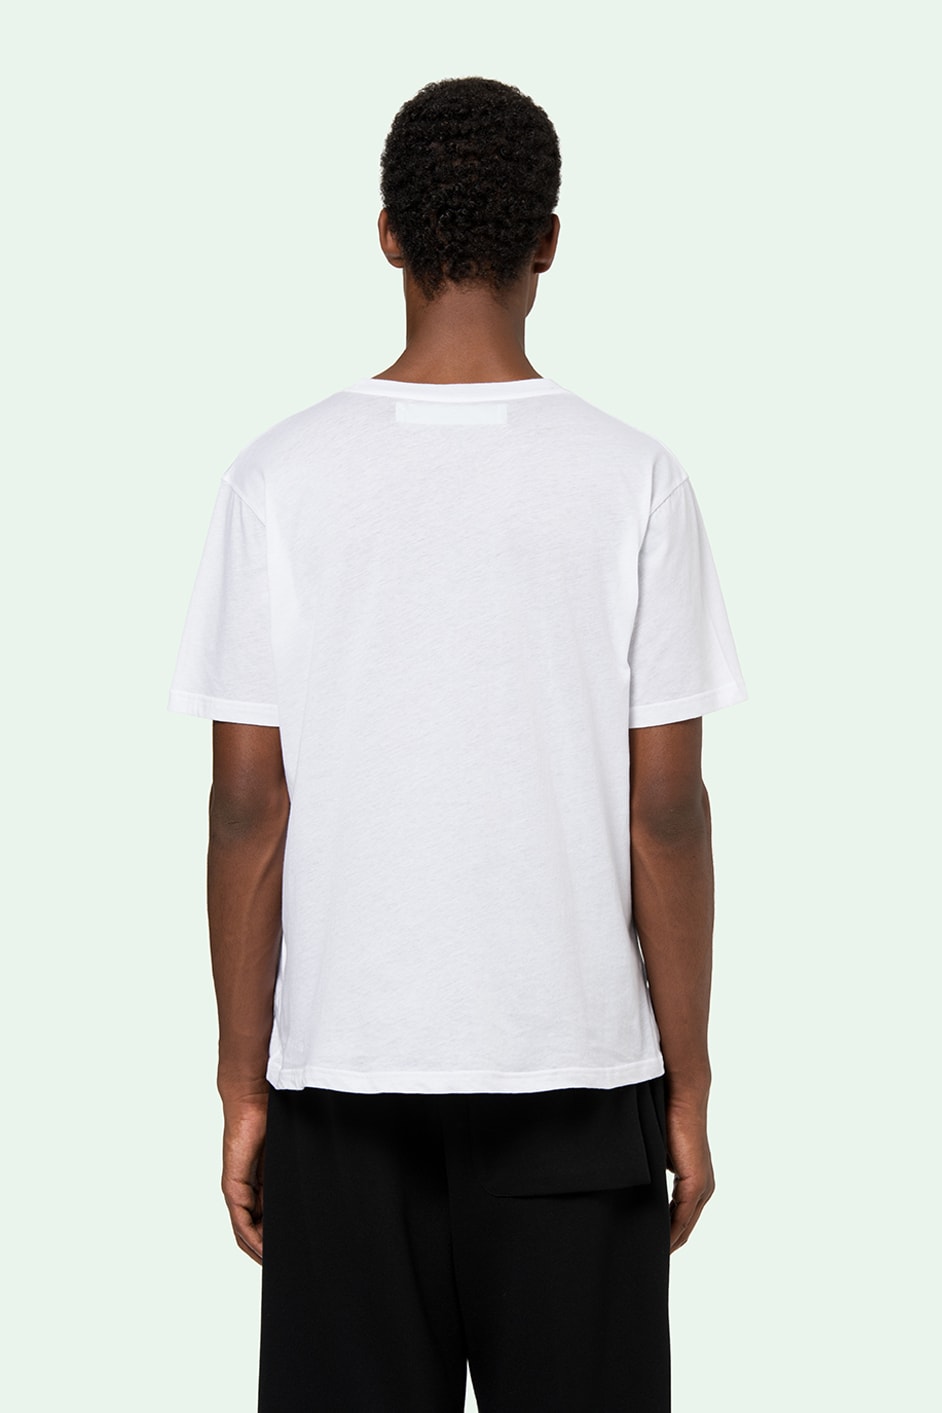 Off-White Virgil Abloh T-Shirt Pack March 2018 Delivery Date